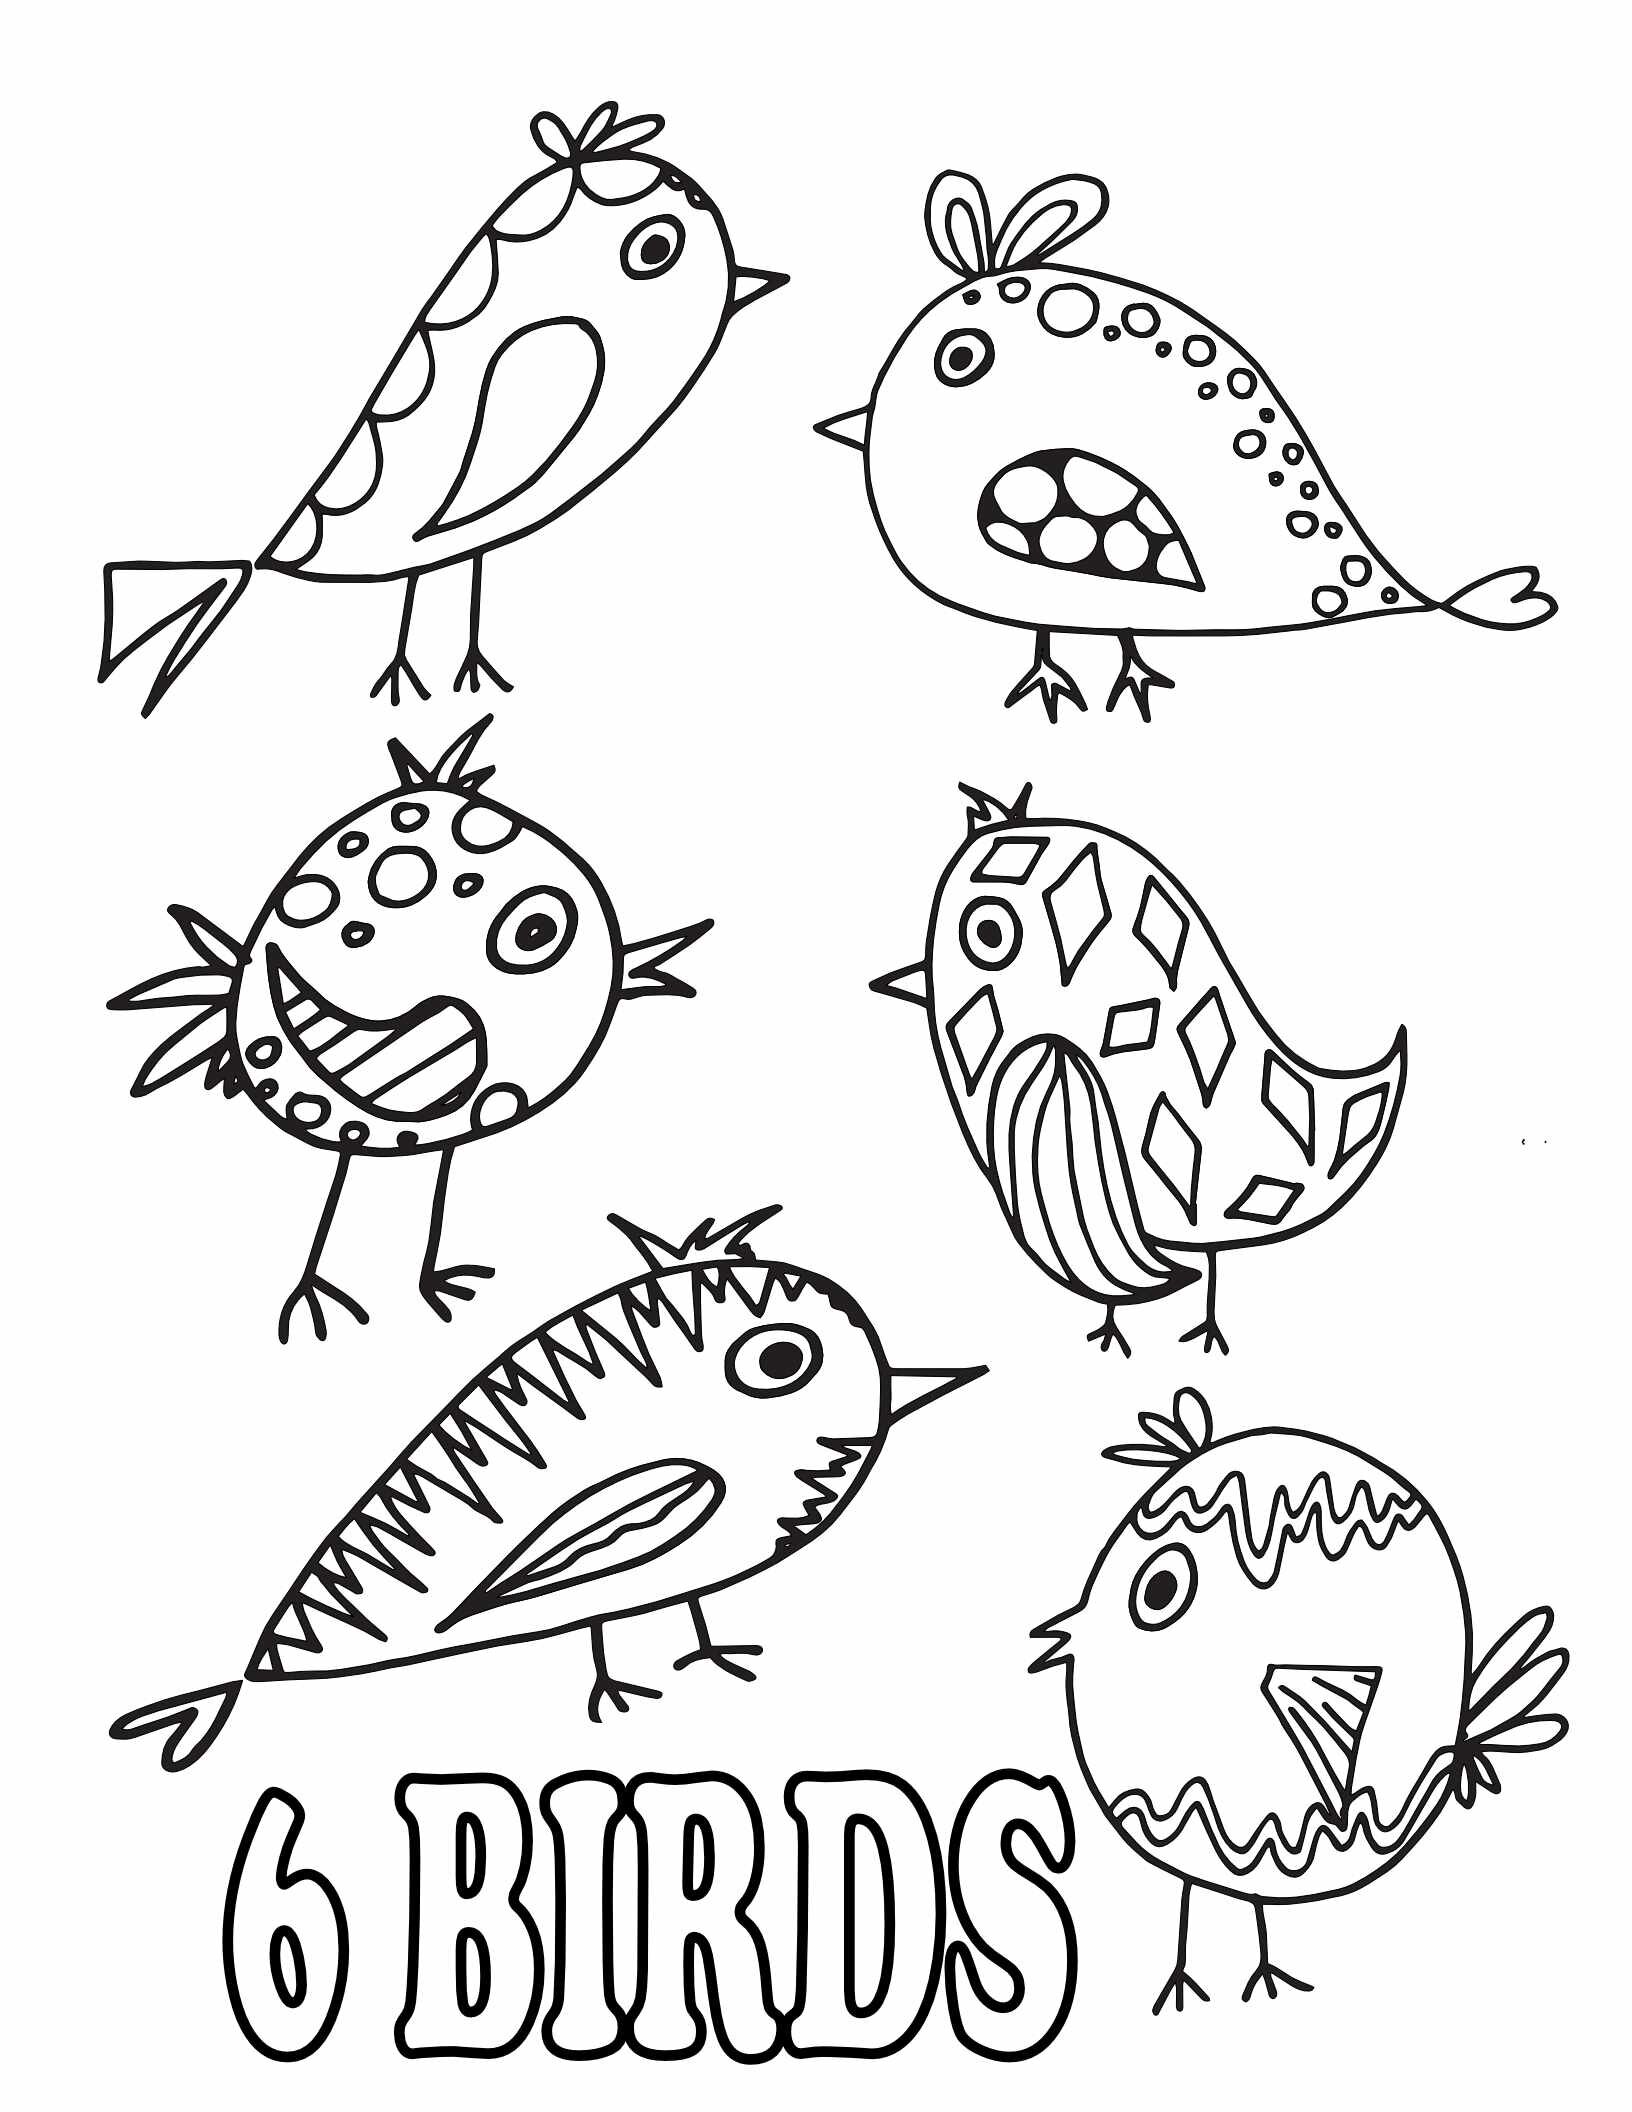 6 Birds10 Free Animal Number Coloring Pages - 6 birds